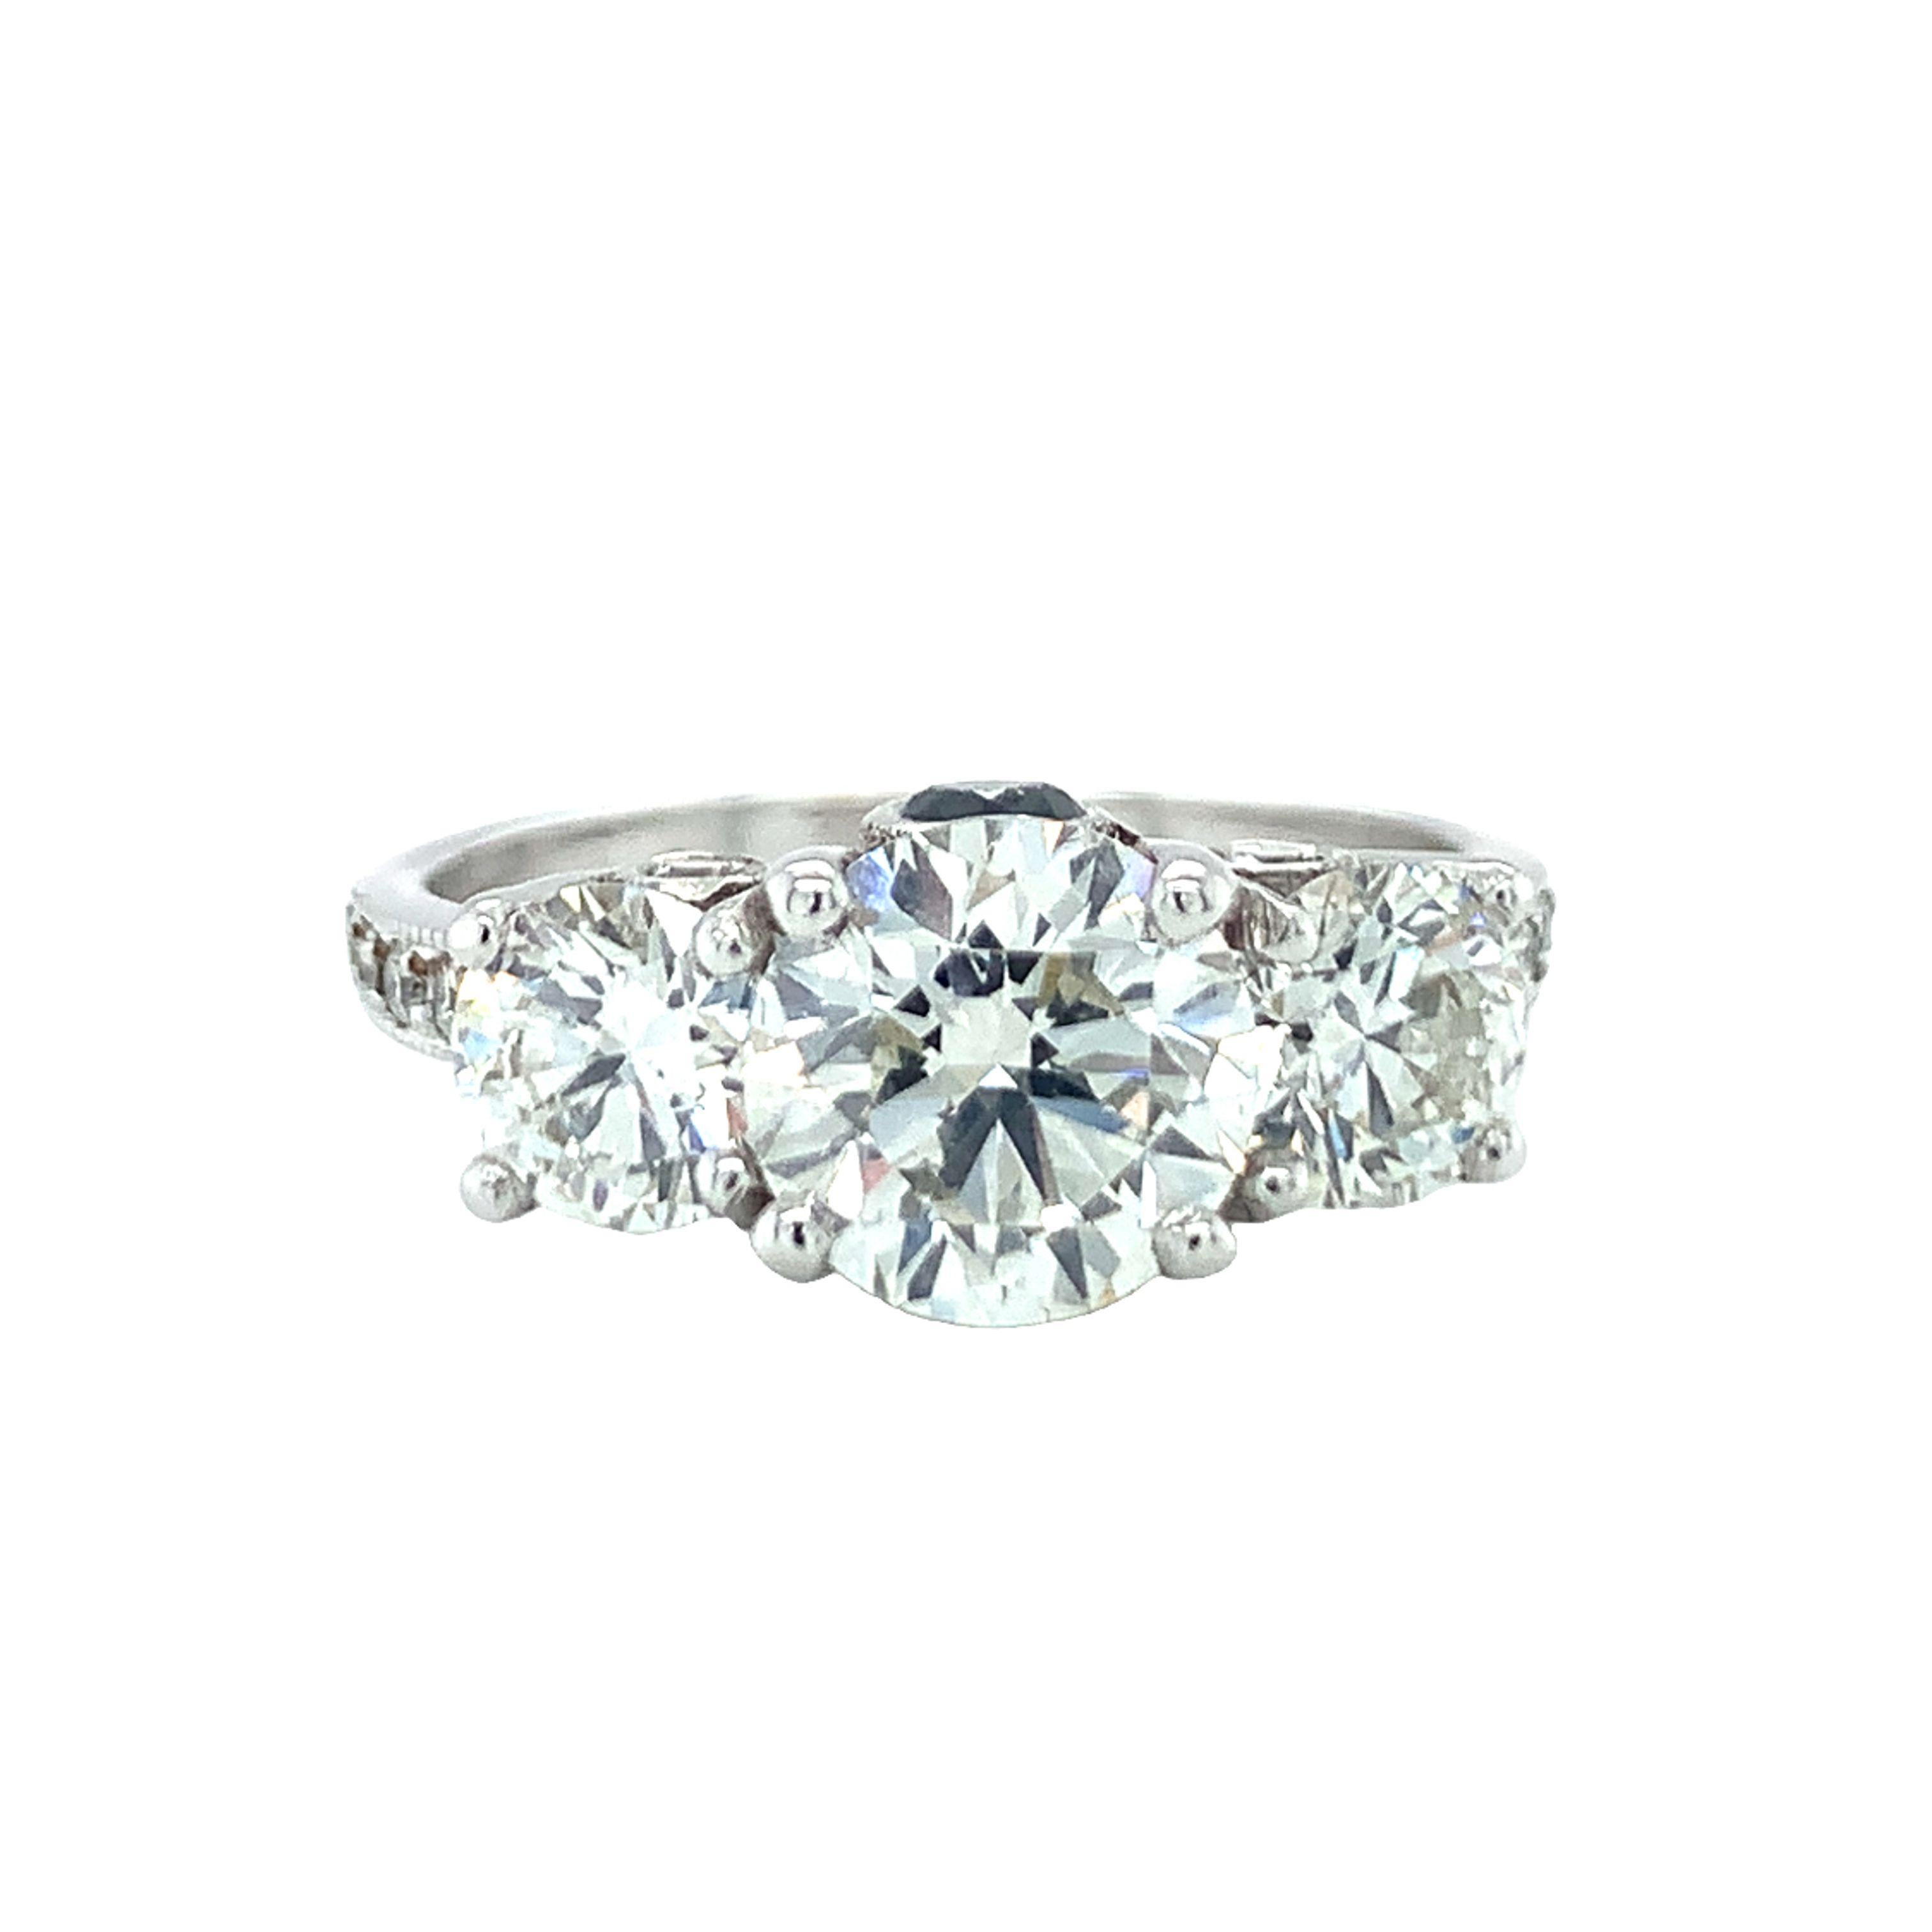 GIA Certified 1.62 Carat Diamond 18K White Gold Engagement Ring In Good Condition For Sale In Beverly Hills, CA